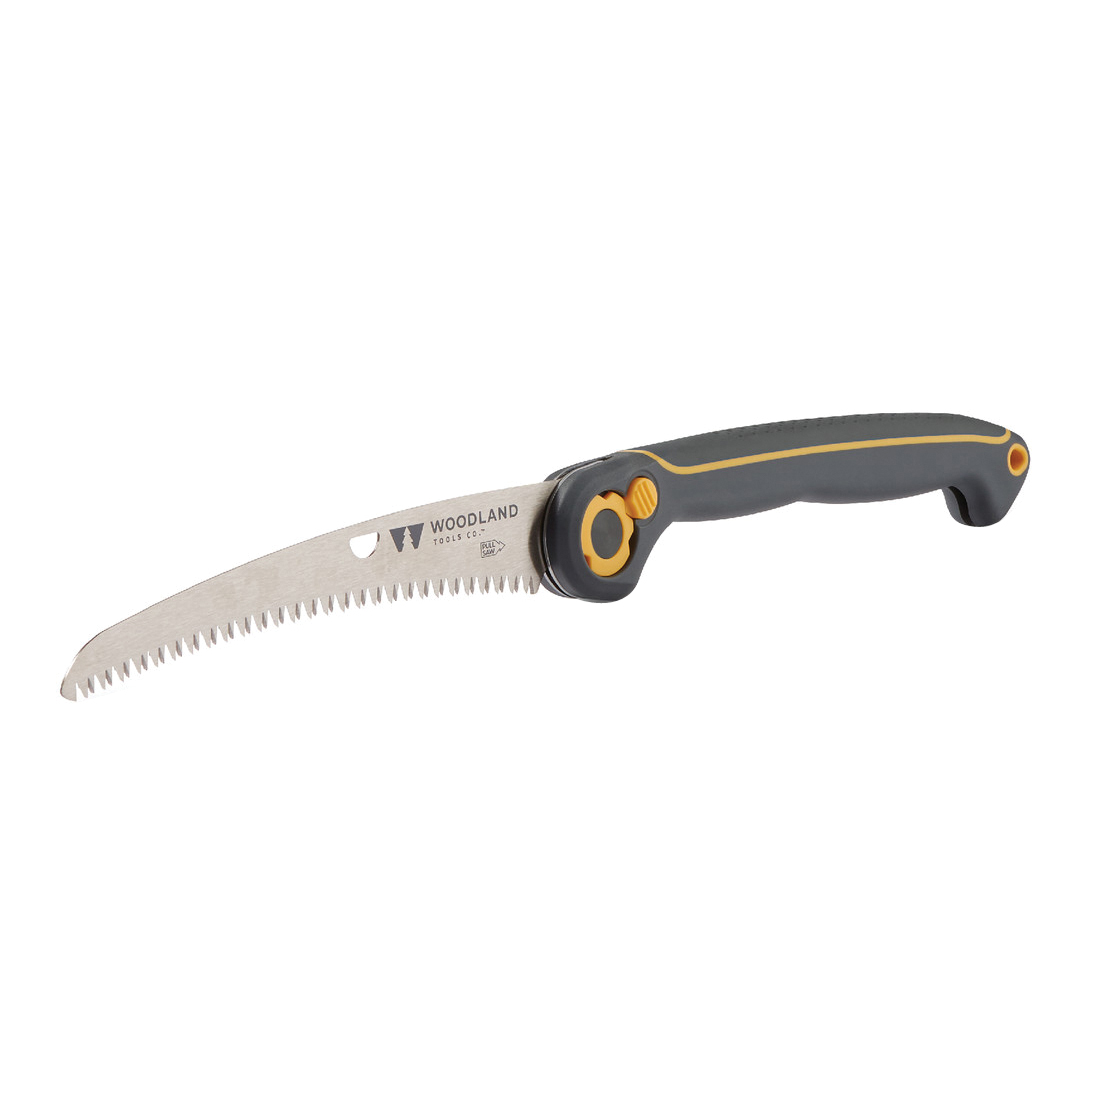 06-5003-100 Folding Saw, High Carbon Steel Blade, 8 TPI, Composite Handle, Cushioned Grip Handle